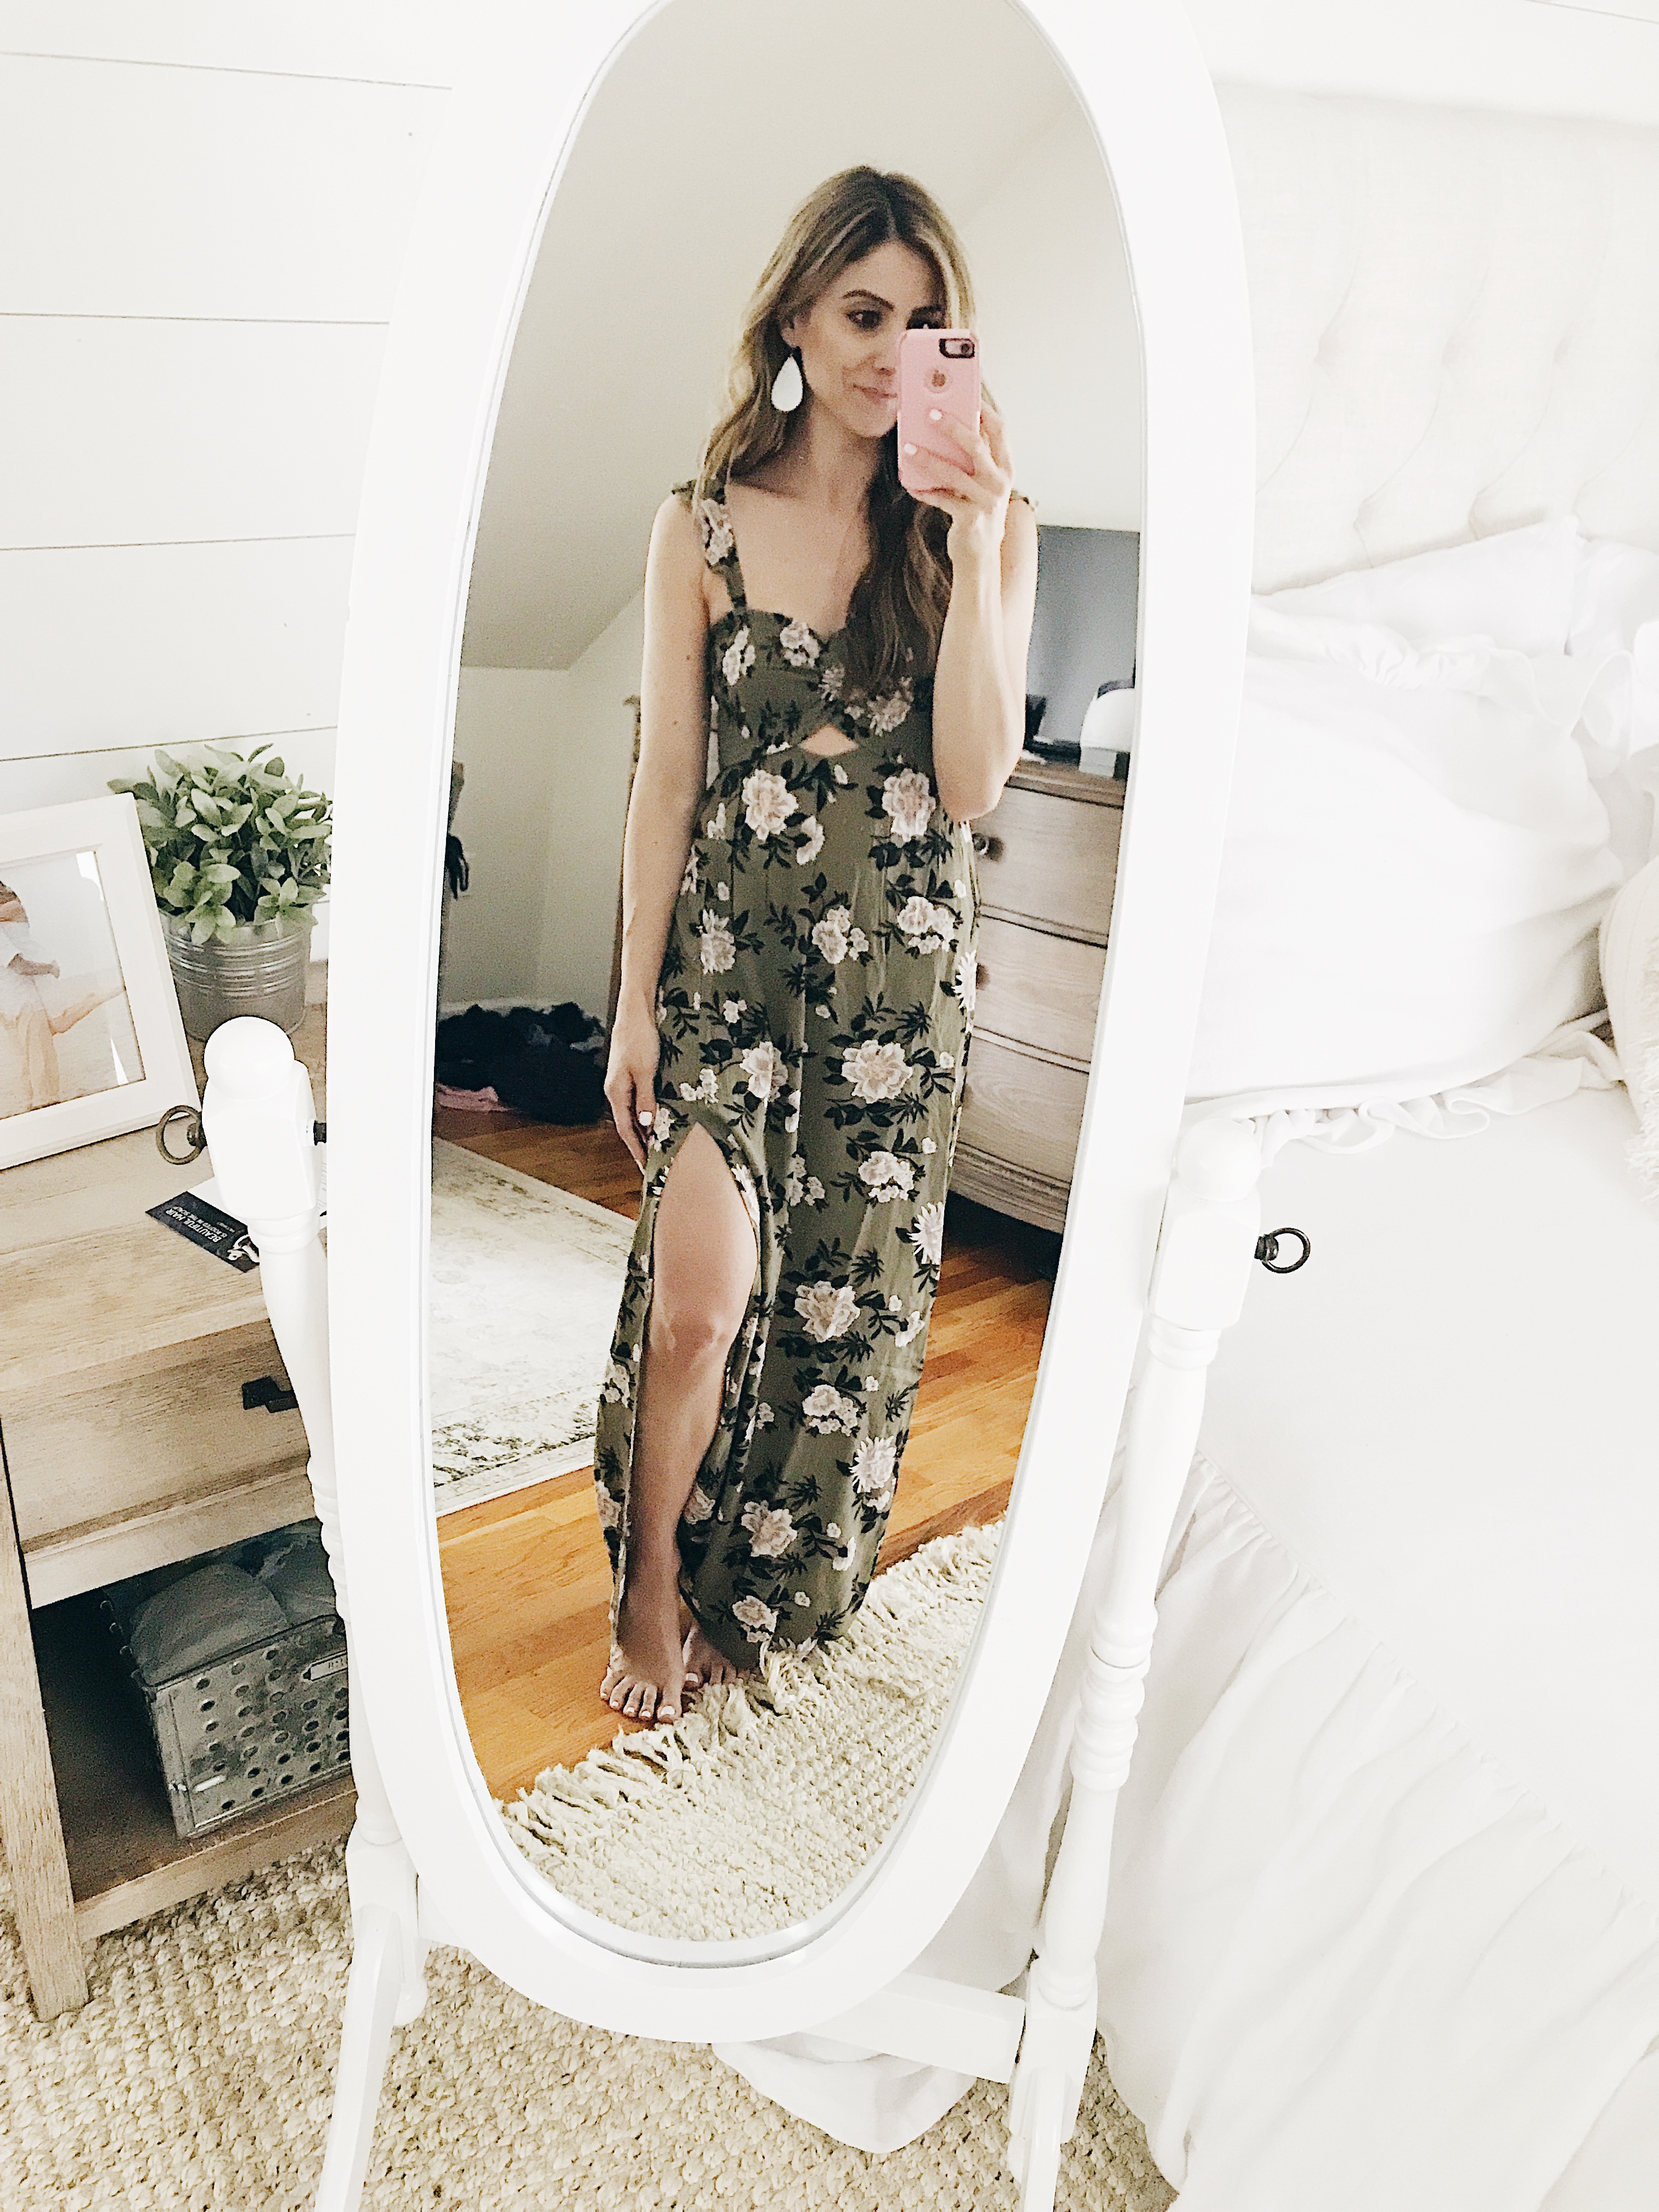 A weekly roundup of items featured across my social media channels, including this American Eagle floral maxi dress and more!